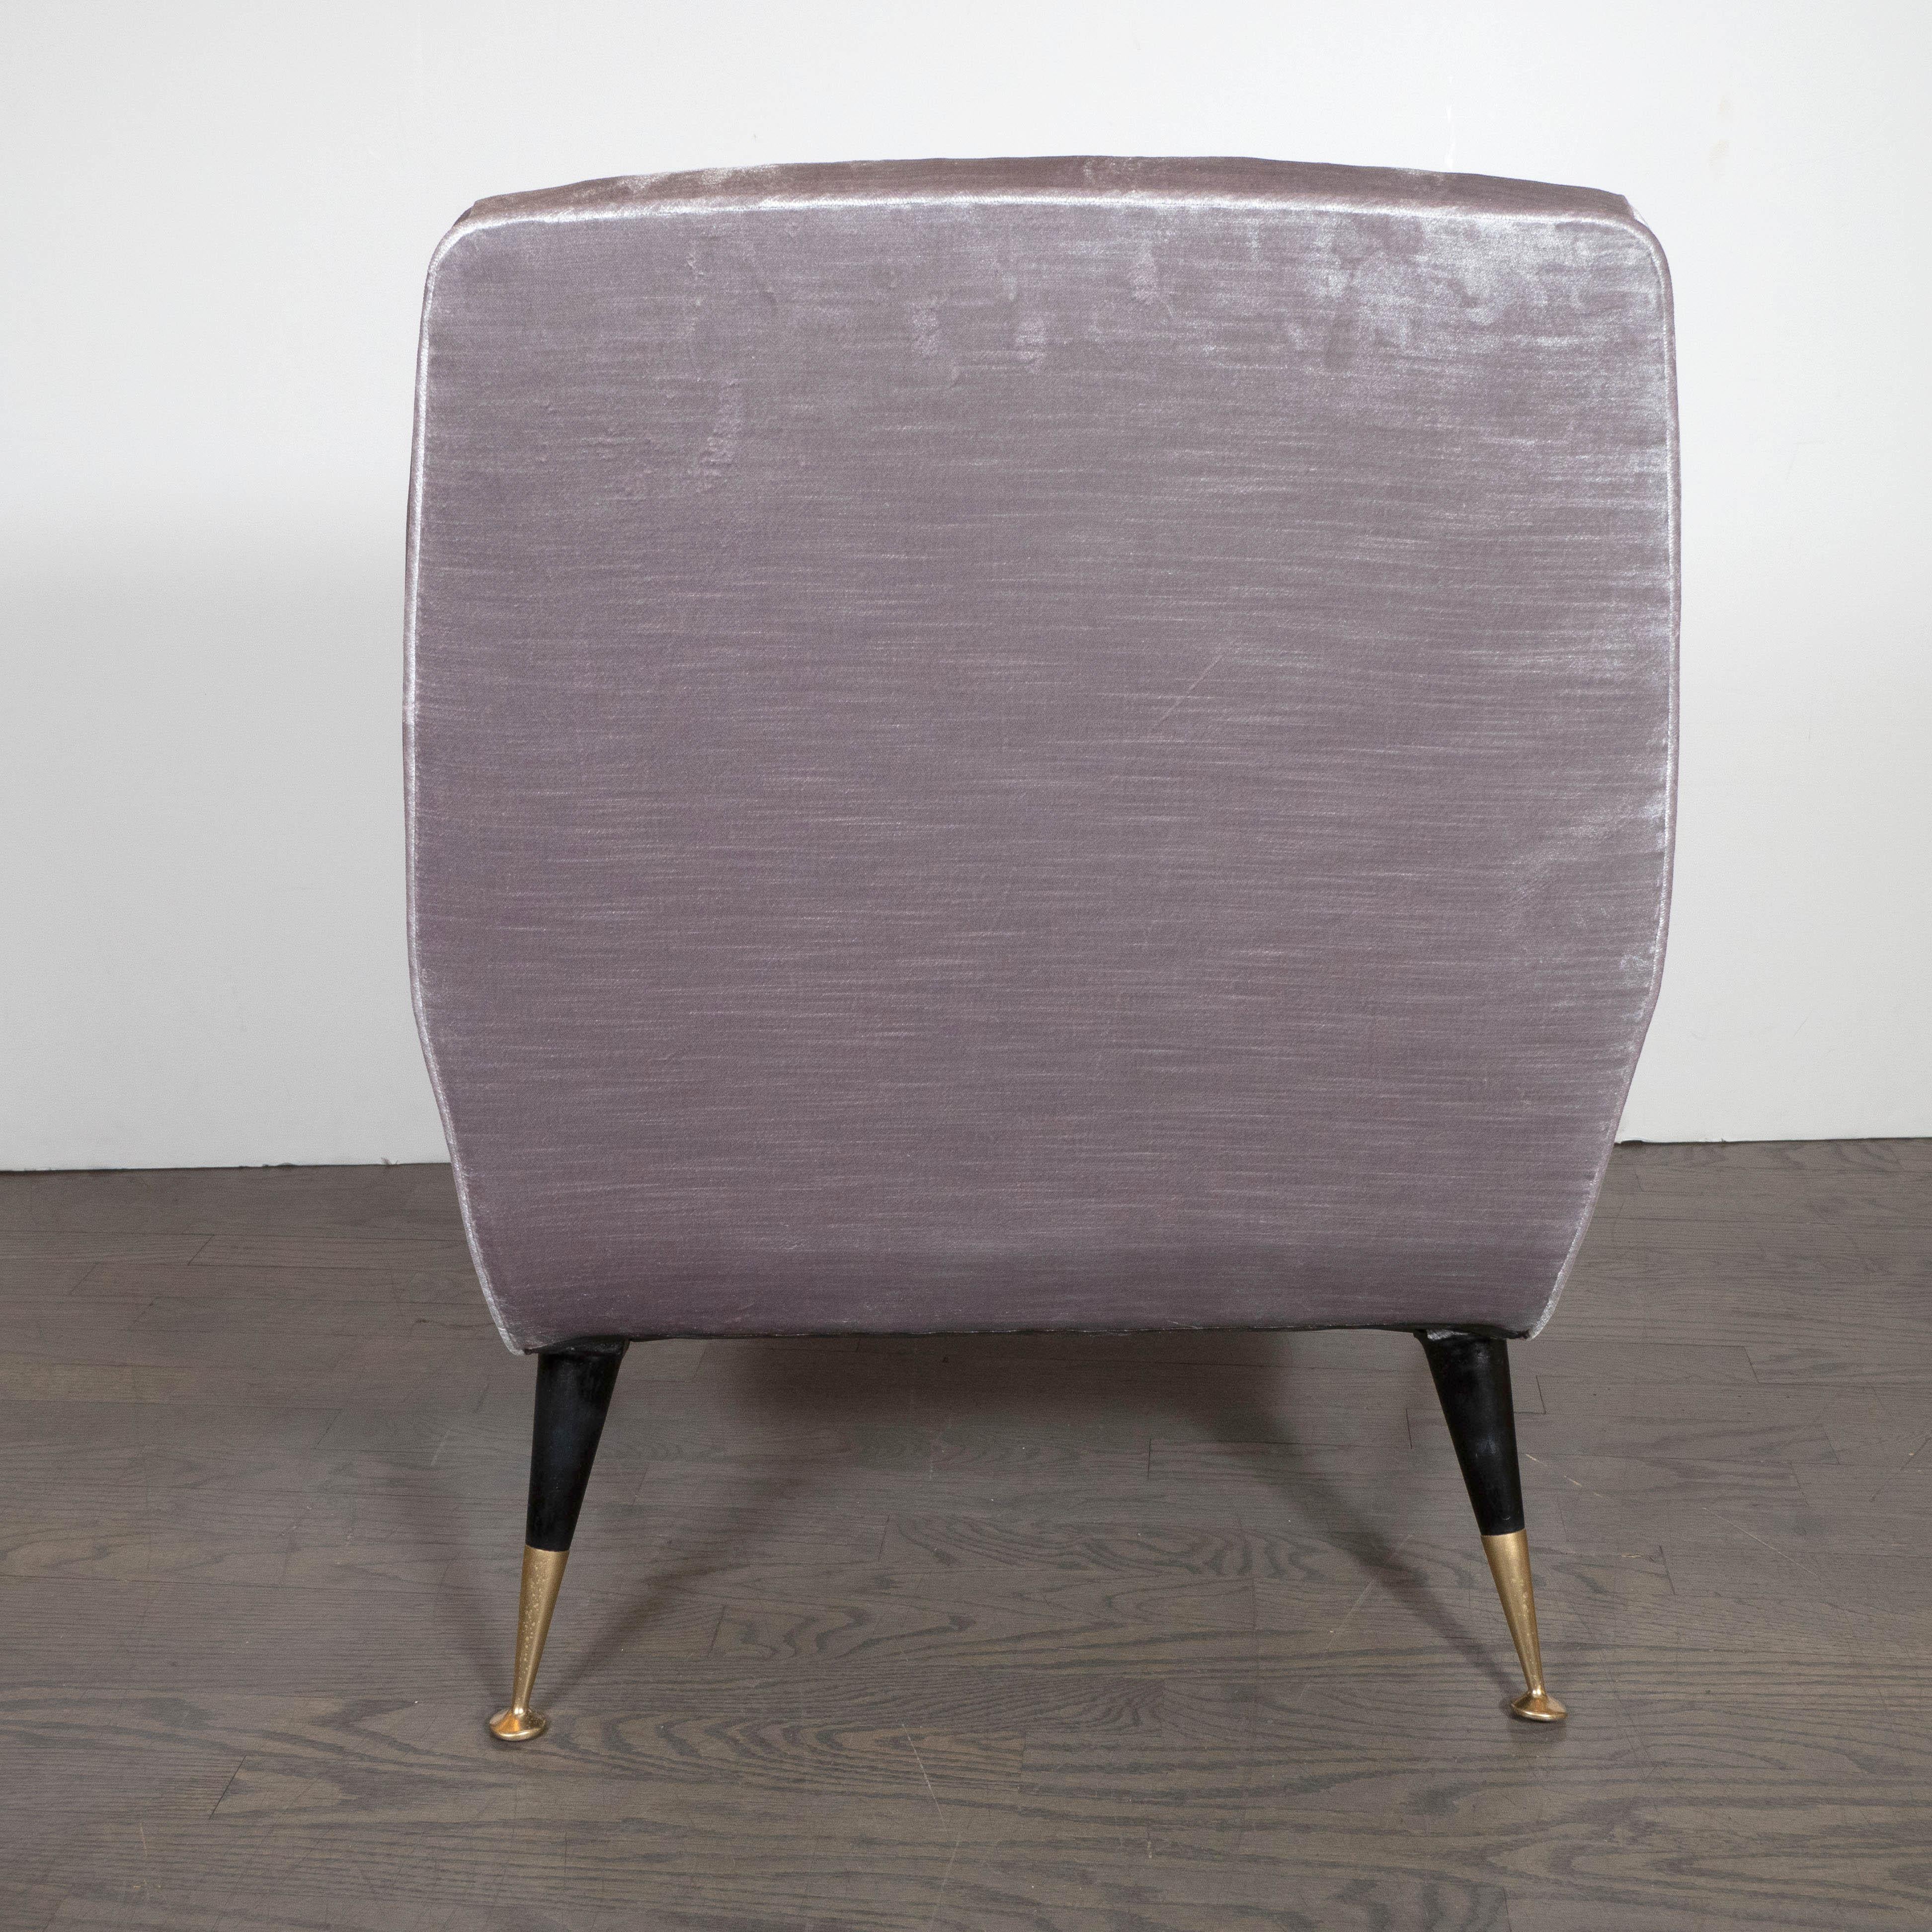 Italian Midcentury Lounge Chair with Brass Sabots in Smoked Lavender Velvet 1